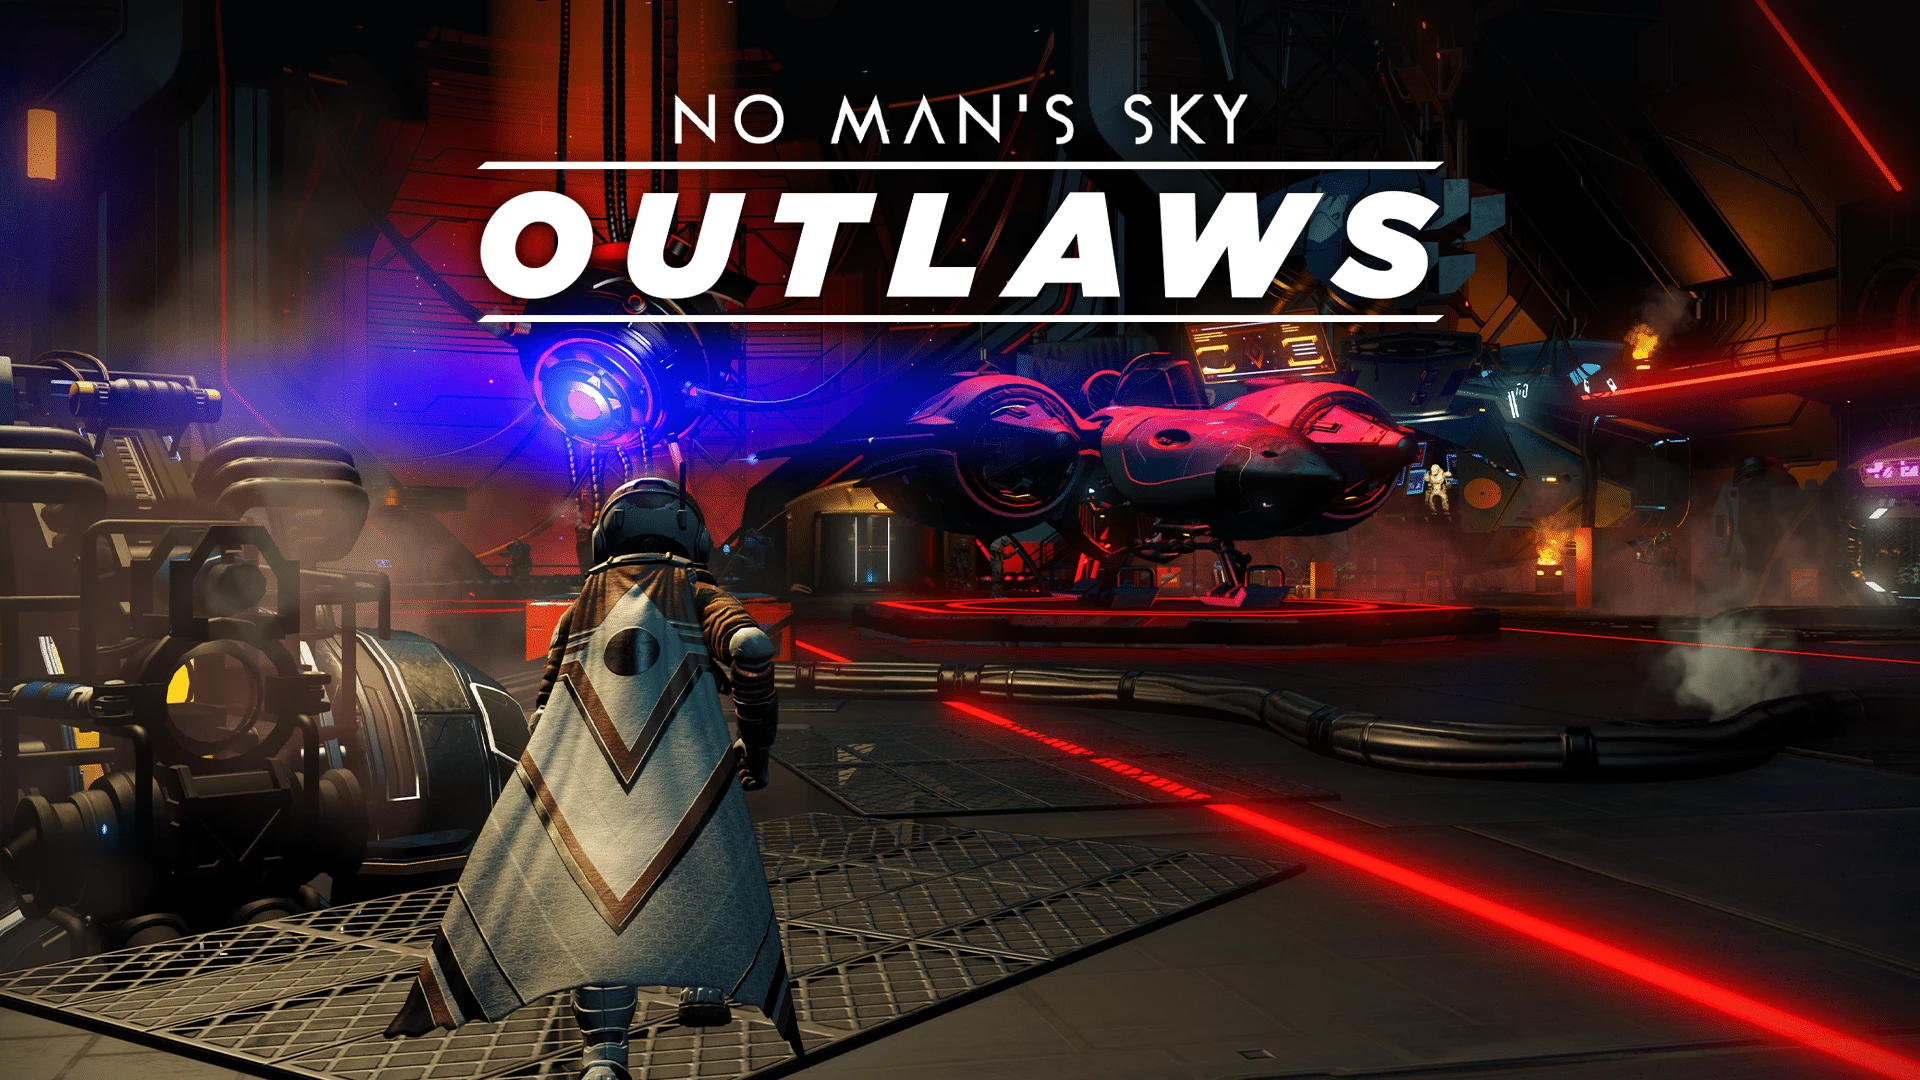 The No Man's Sky Outlaws update improves space combat